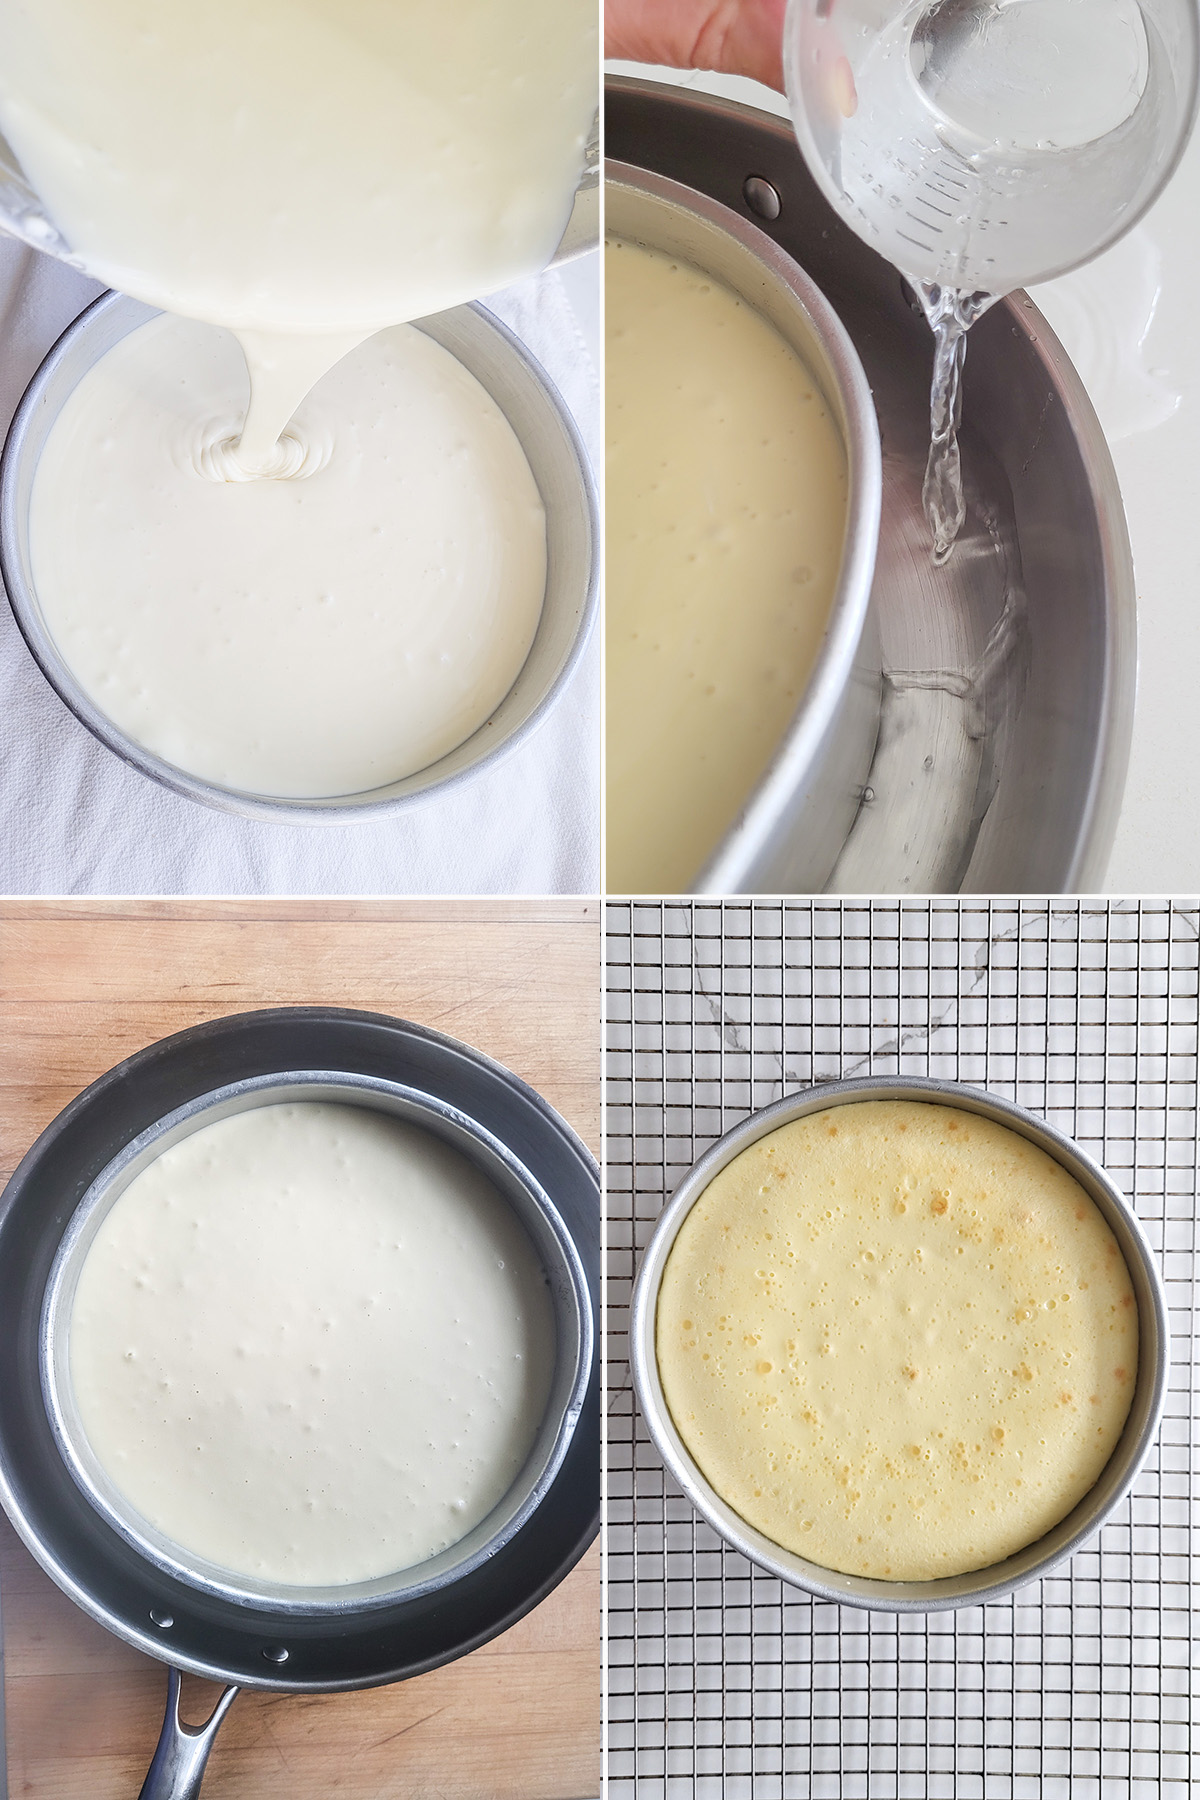 Cheesecake batter in a pan. Water poured around the pan. A baked cheesecake on a cooling rack.